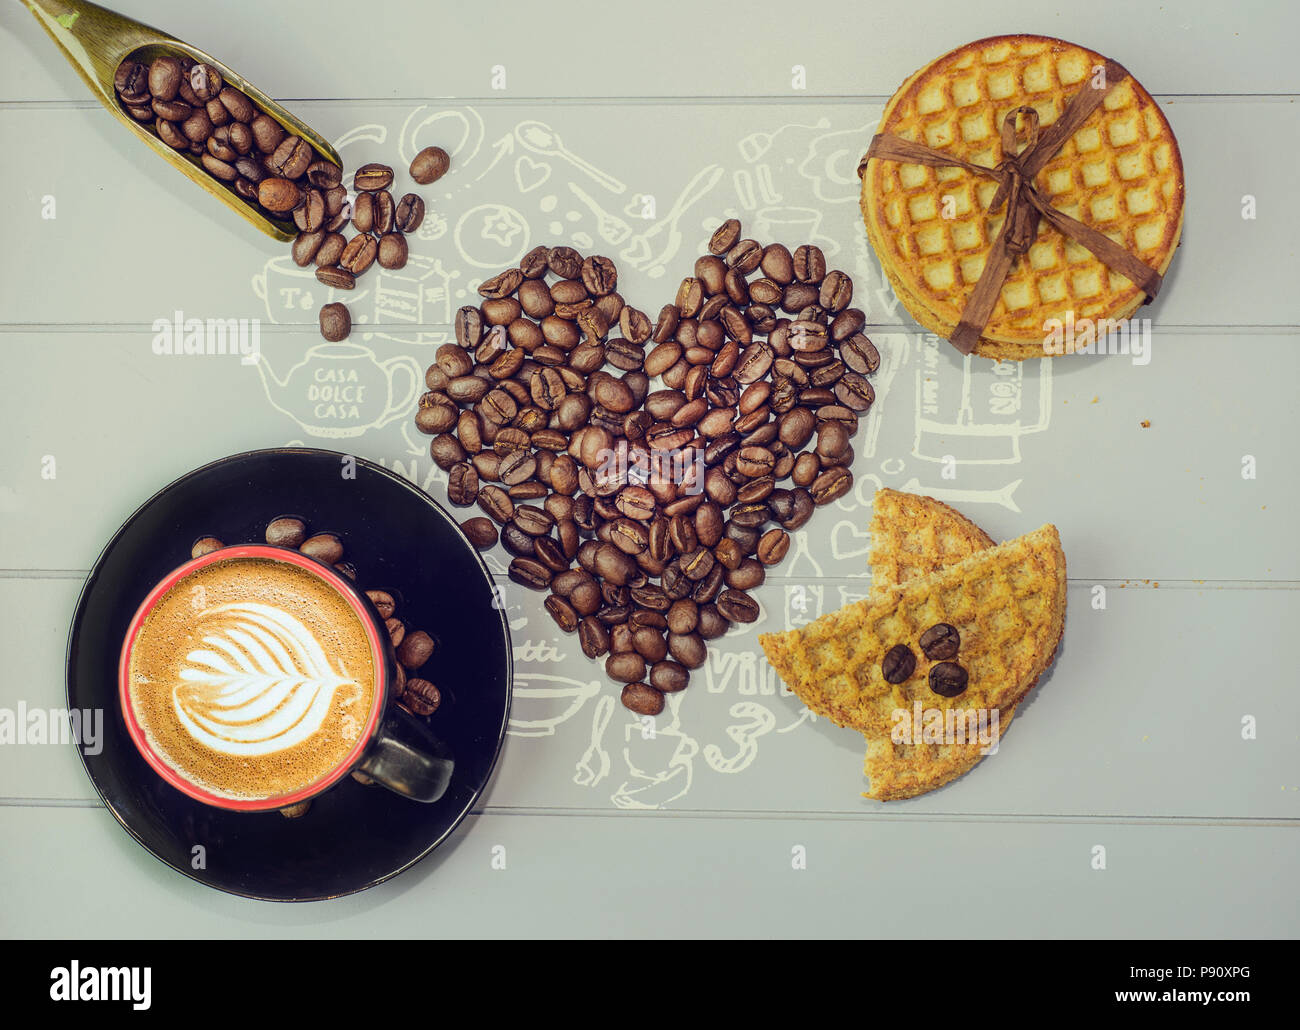 A great selection of free coffee stock photos. Find a different kind of pictures of coffee including images of cups of coffee, coffee mugs, coffee beans Stock Photo